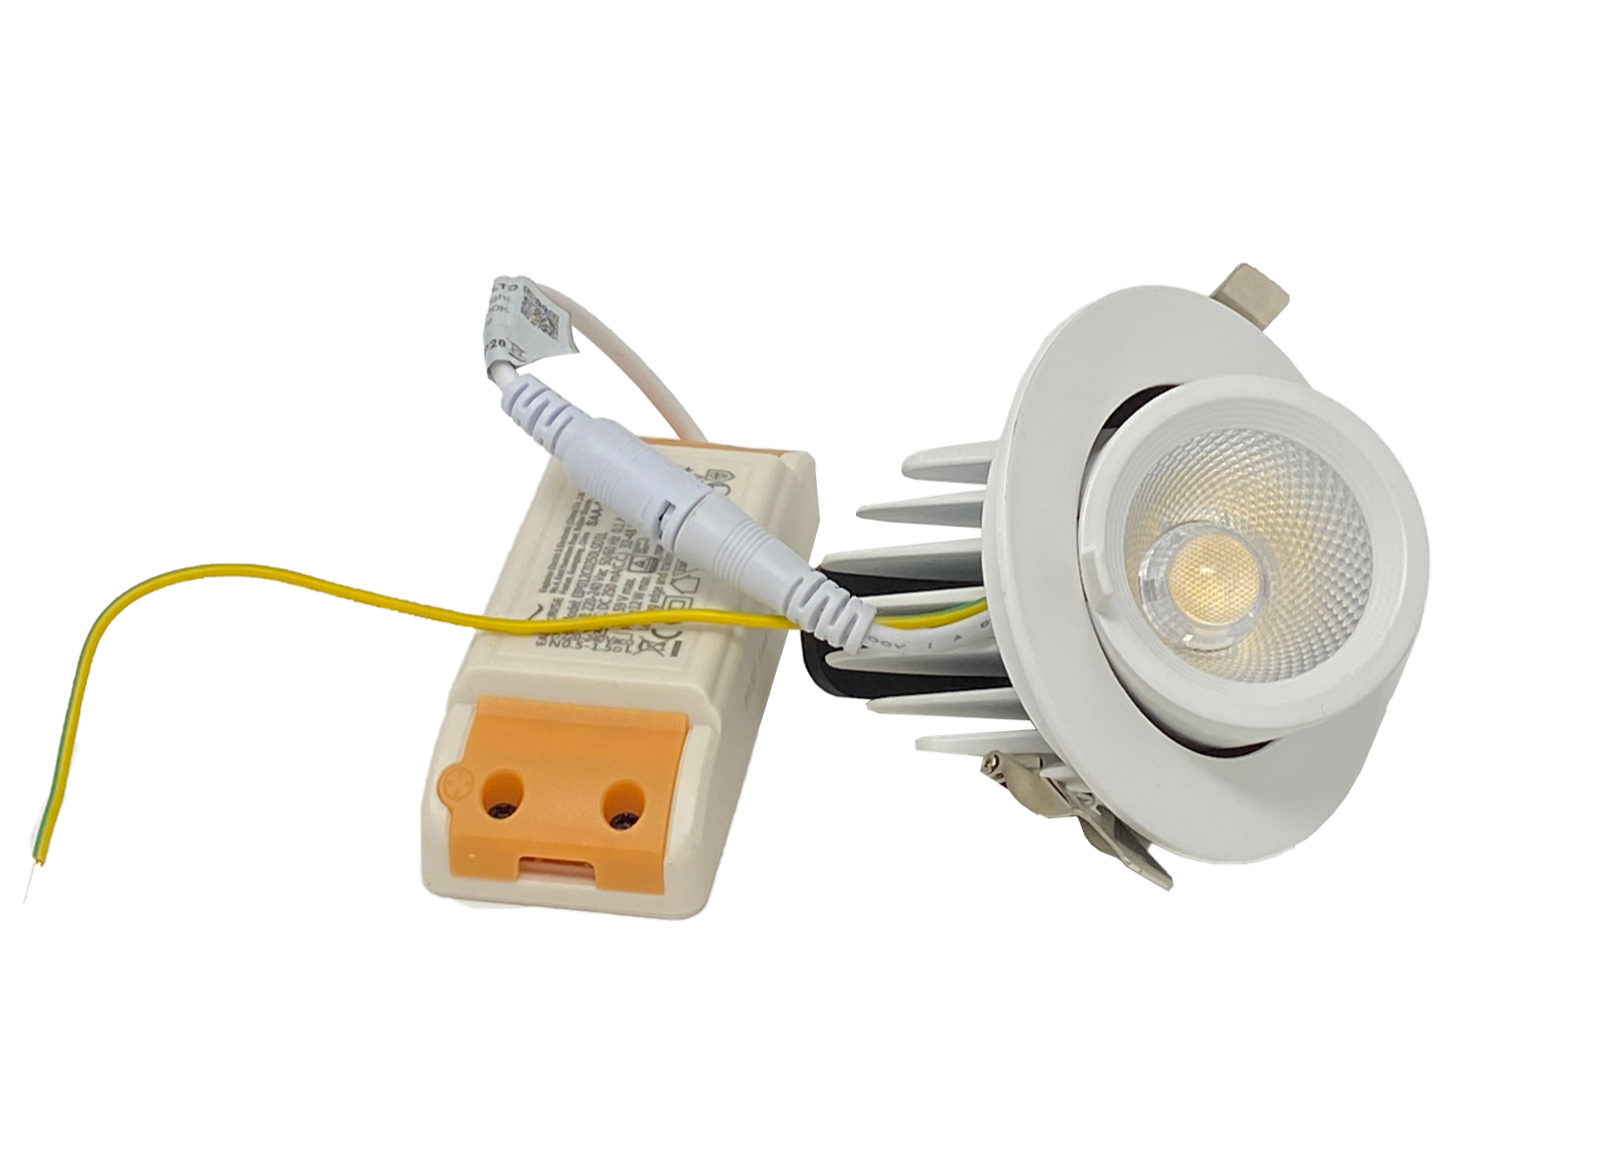 Dimmable LED Scoop DownLight Commercial Directional Adjustable Retail Lights 10w UKEW